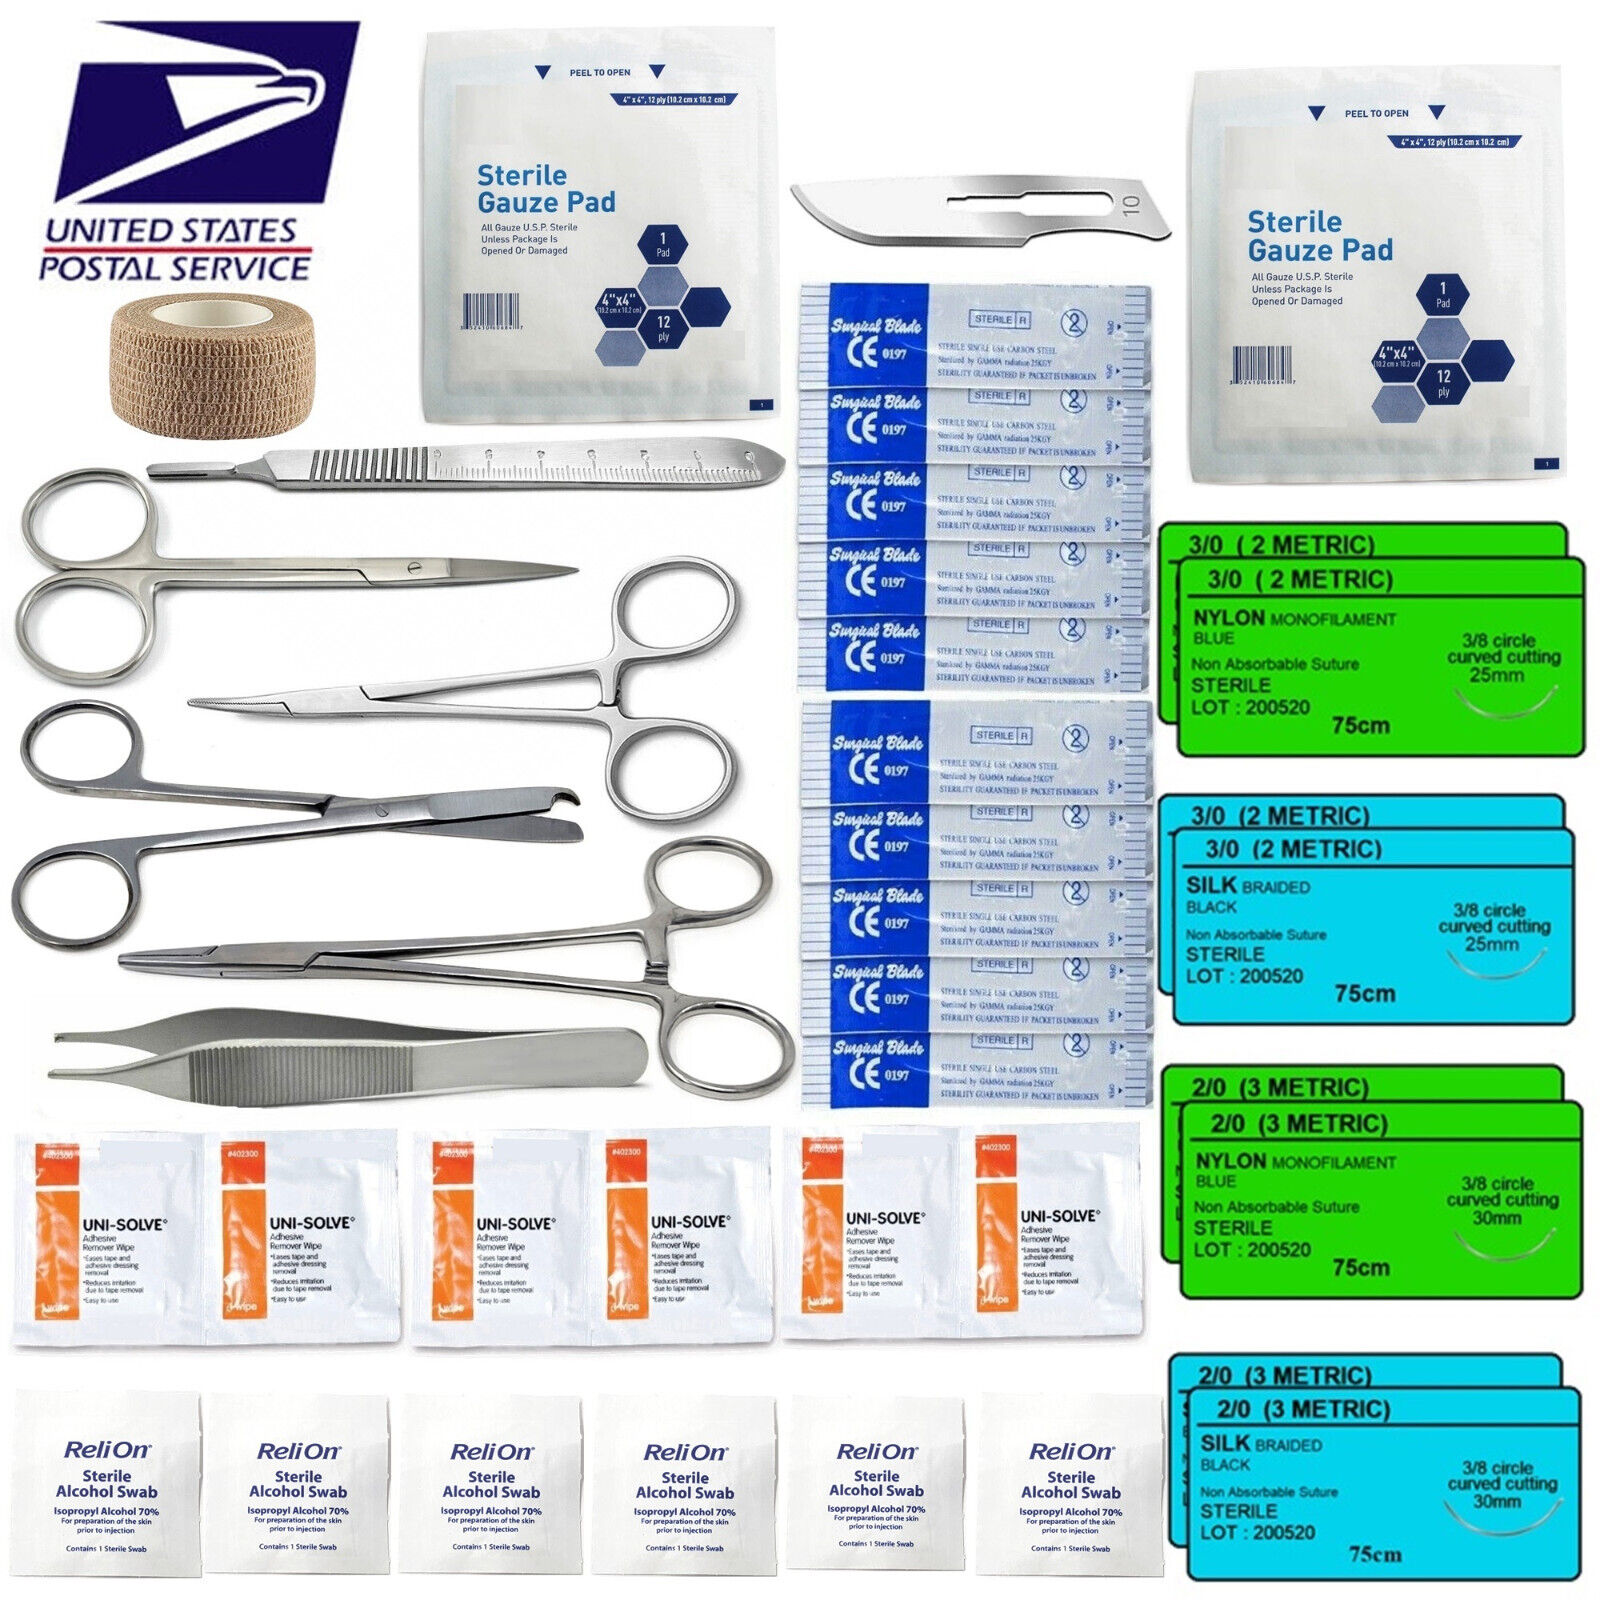 Surgical Suture Kit Basic First Aid Medical Travel Kit - 39 Pieces USA MADE !! Unbranded 39 Pcs Kit